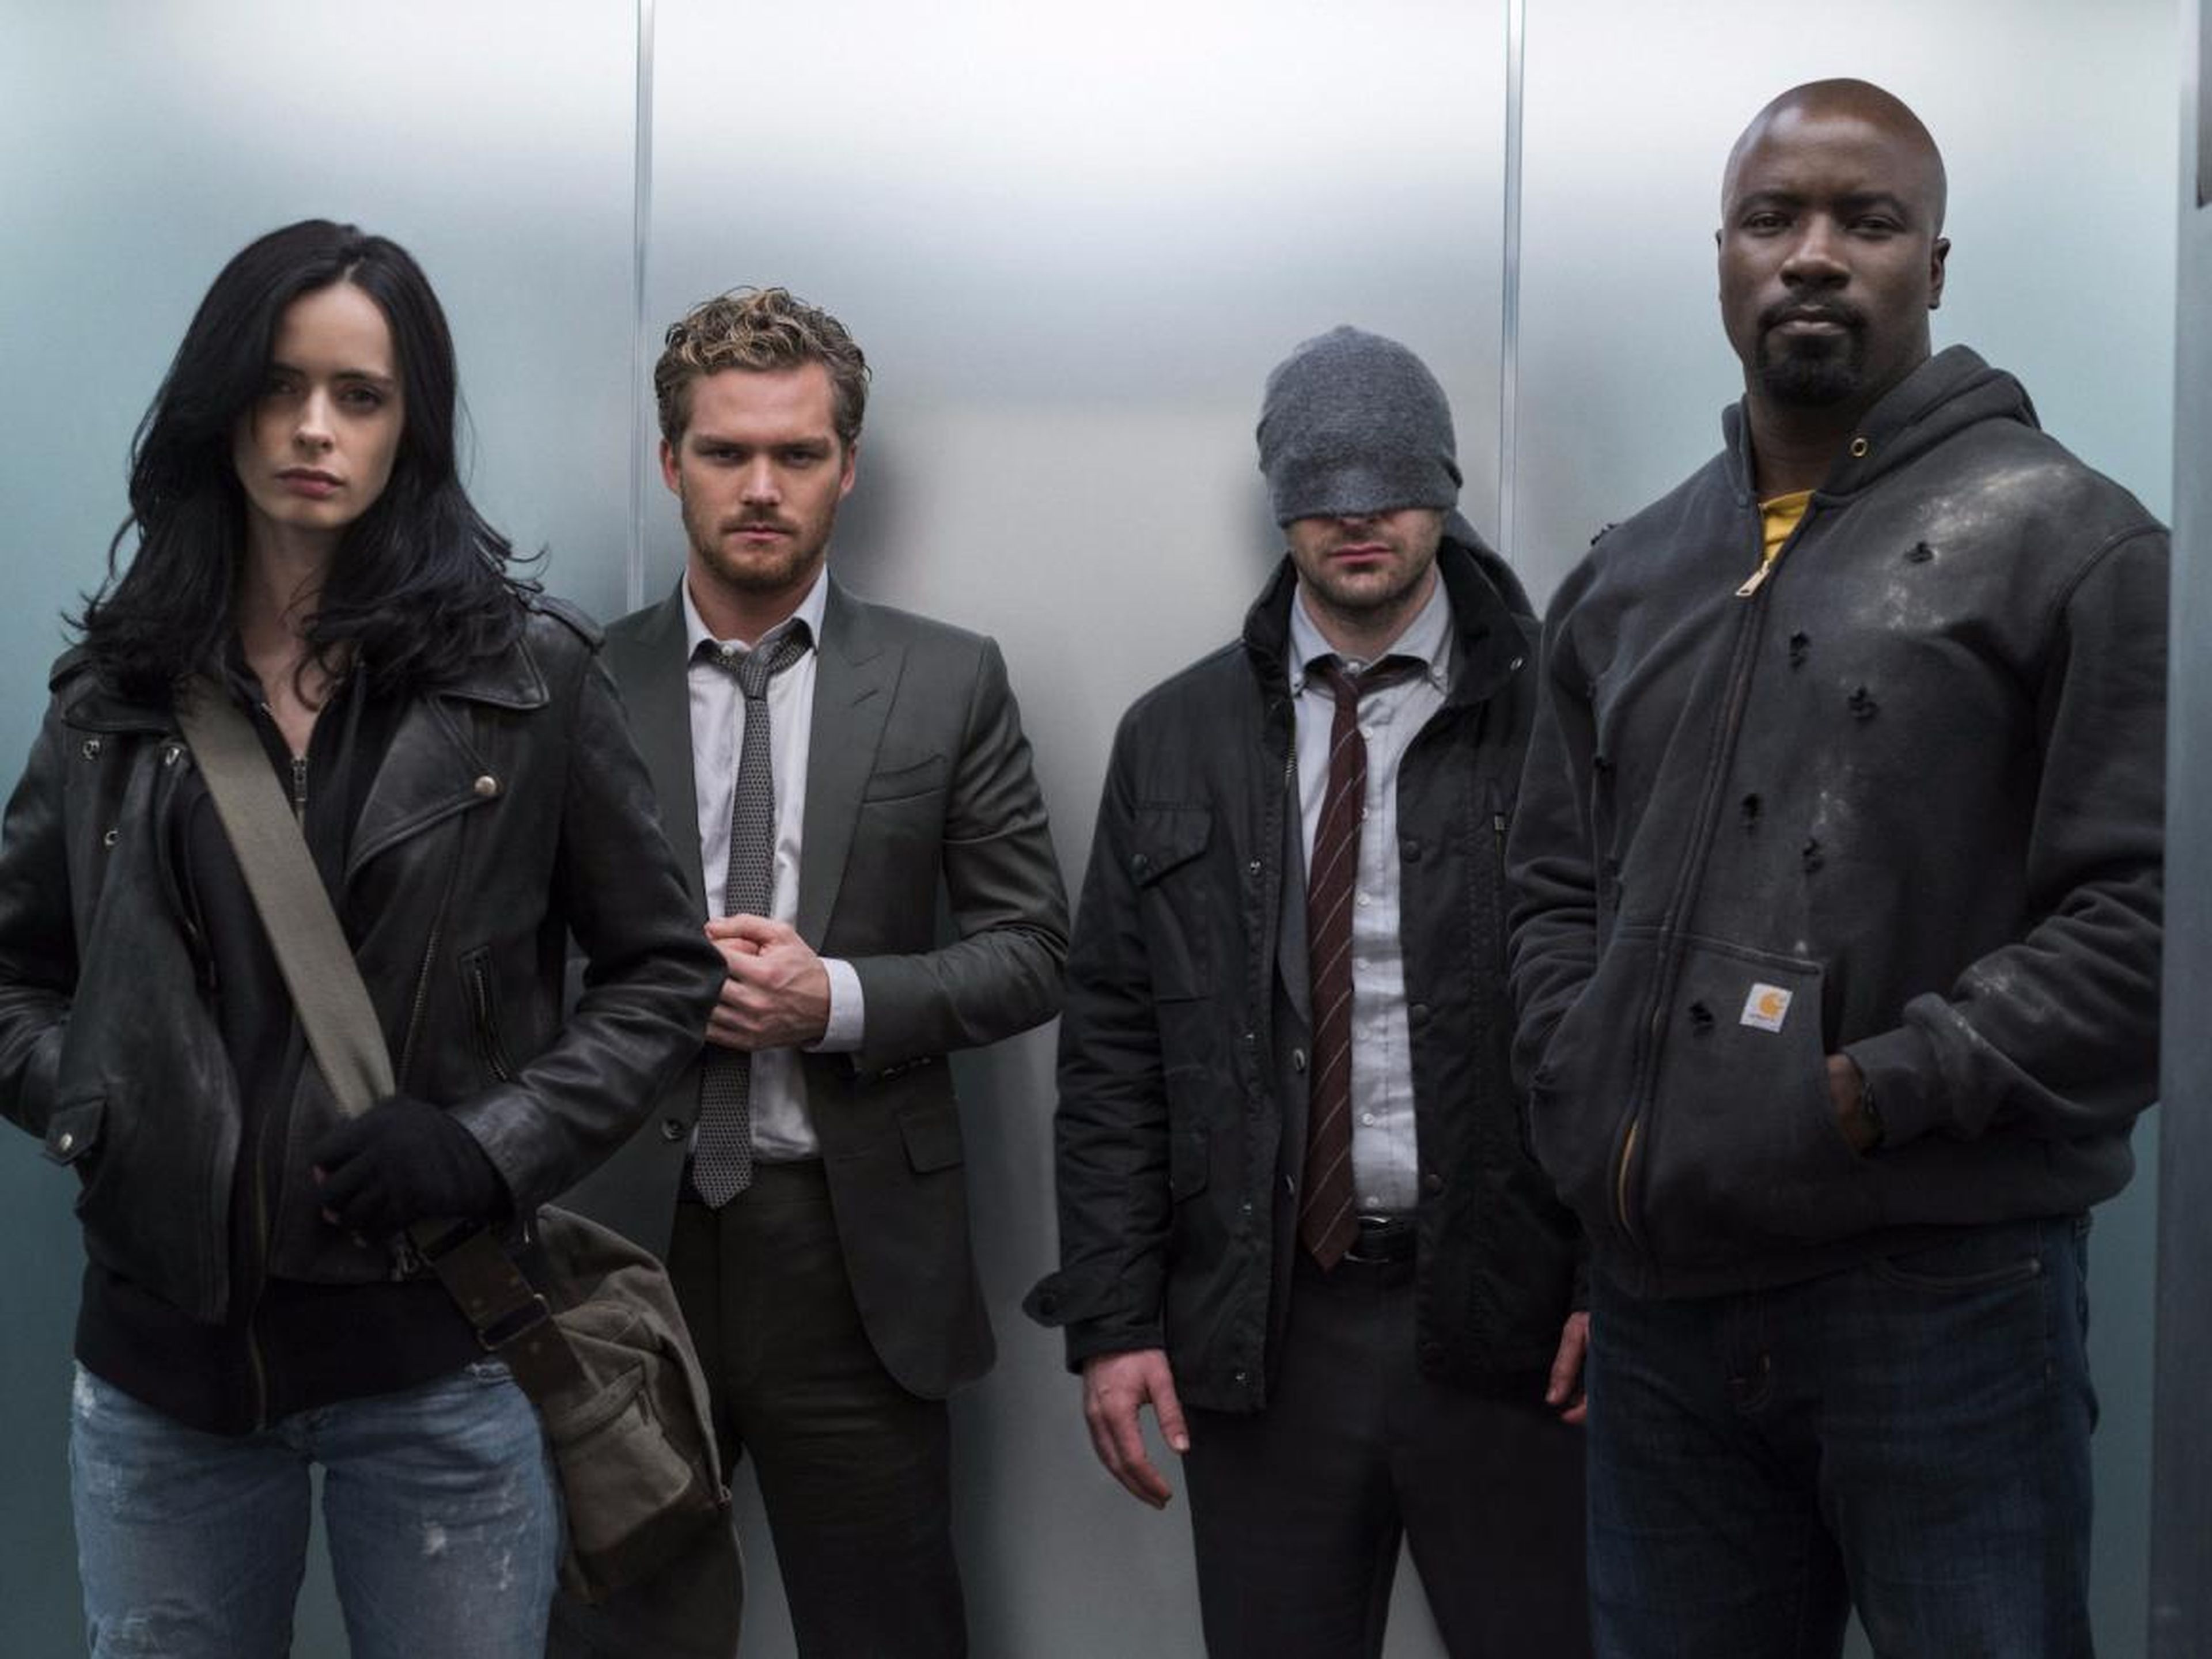 68. "Marvel's The Defenders" — 74%